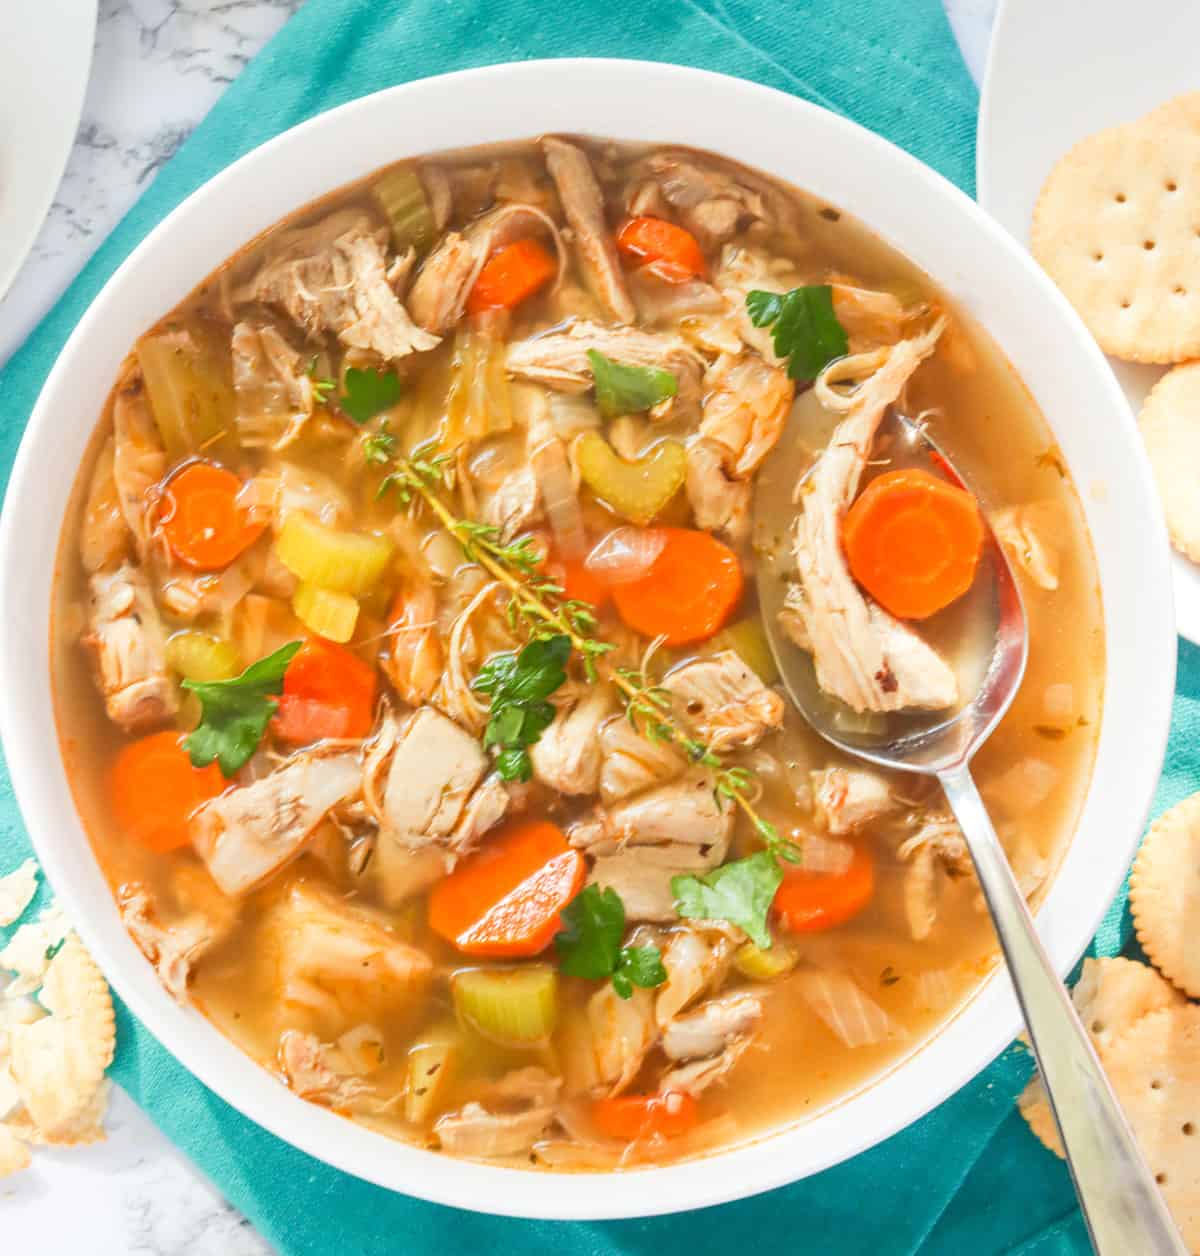 Please enjoy the hearty chicken and Chinese cabbage soup.